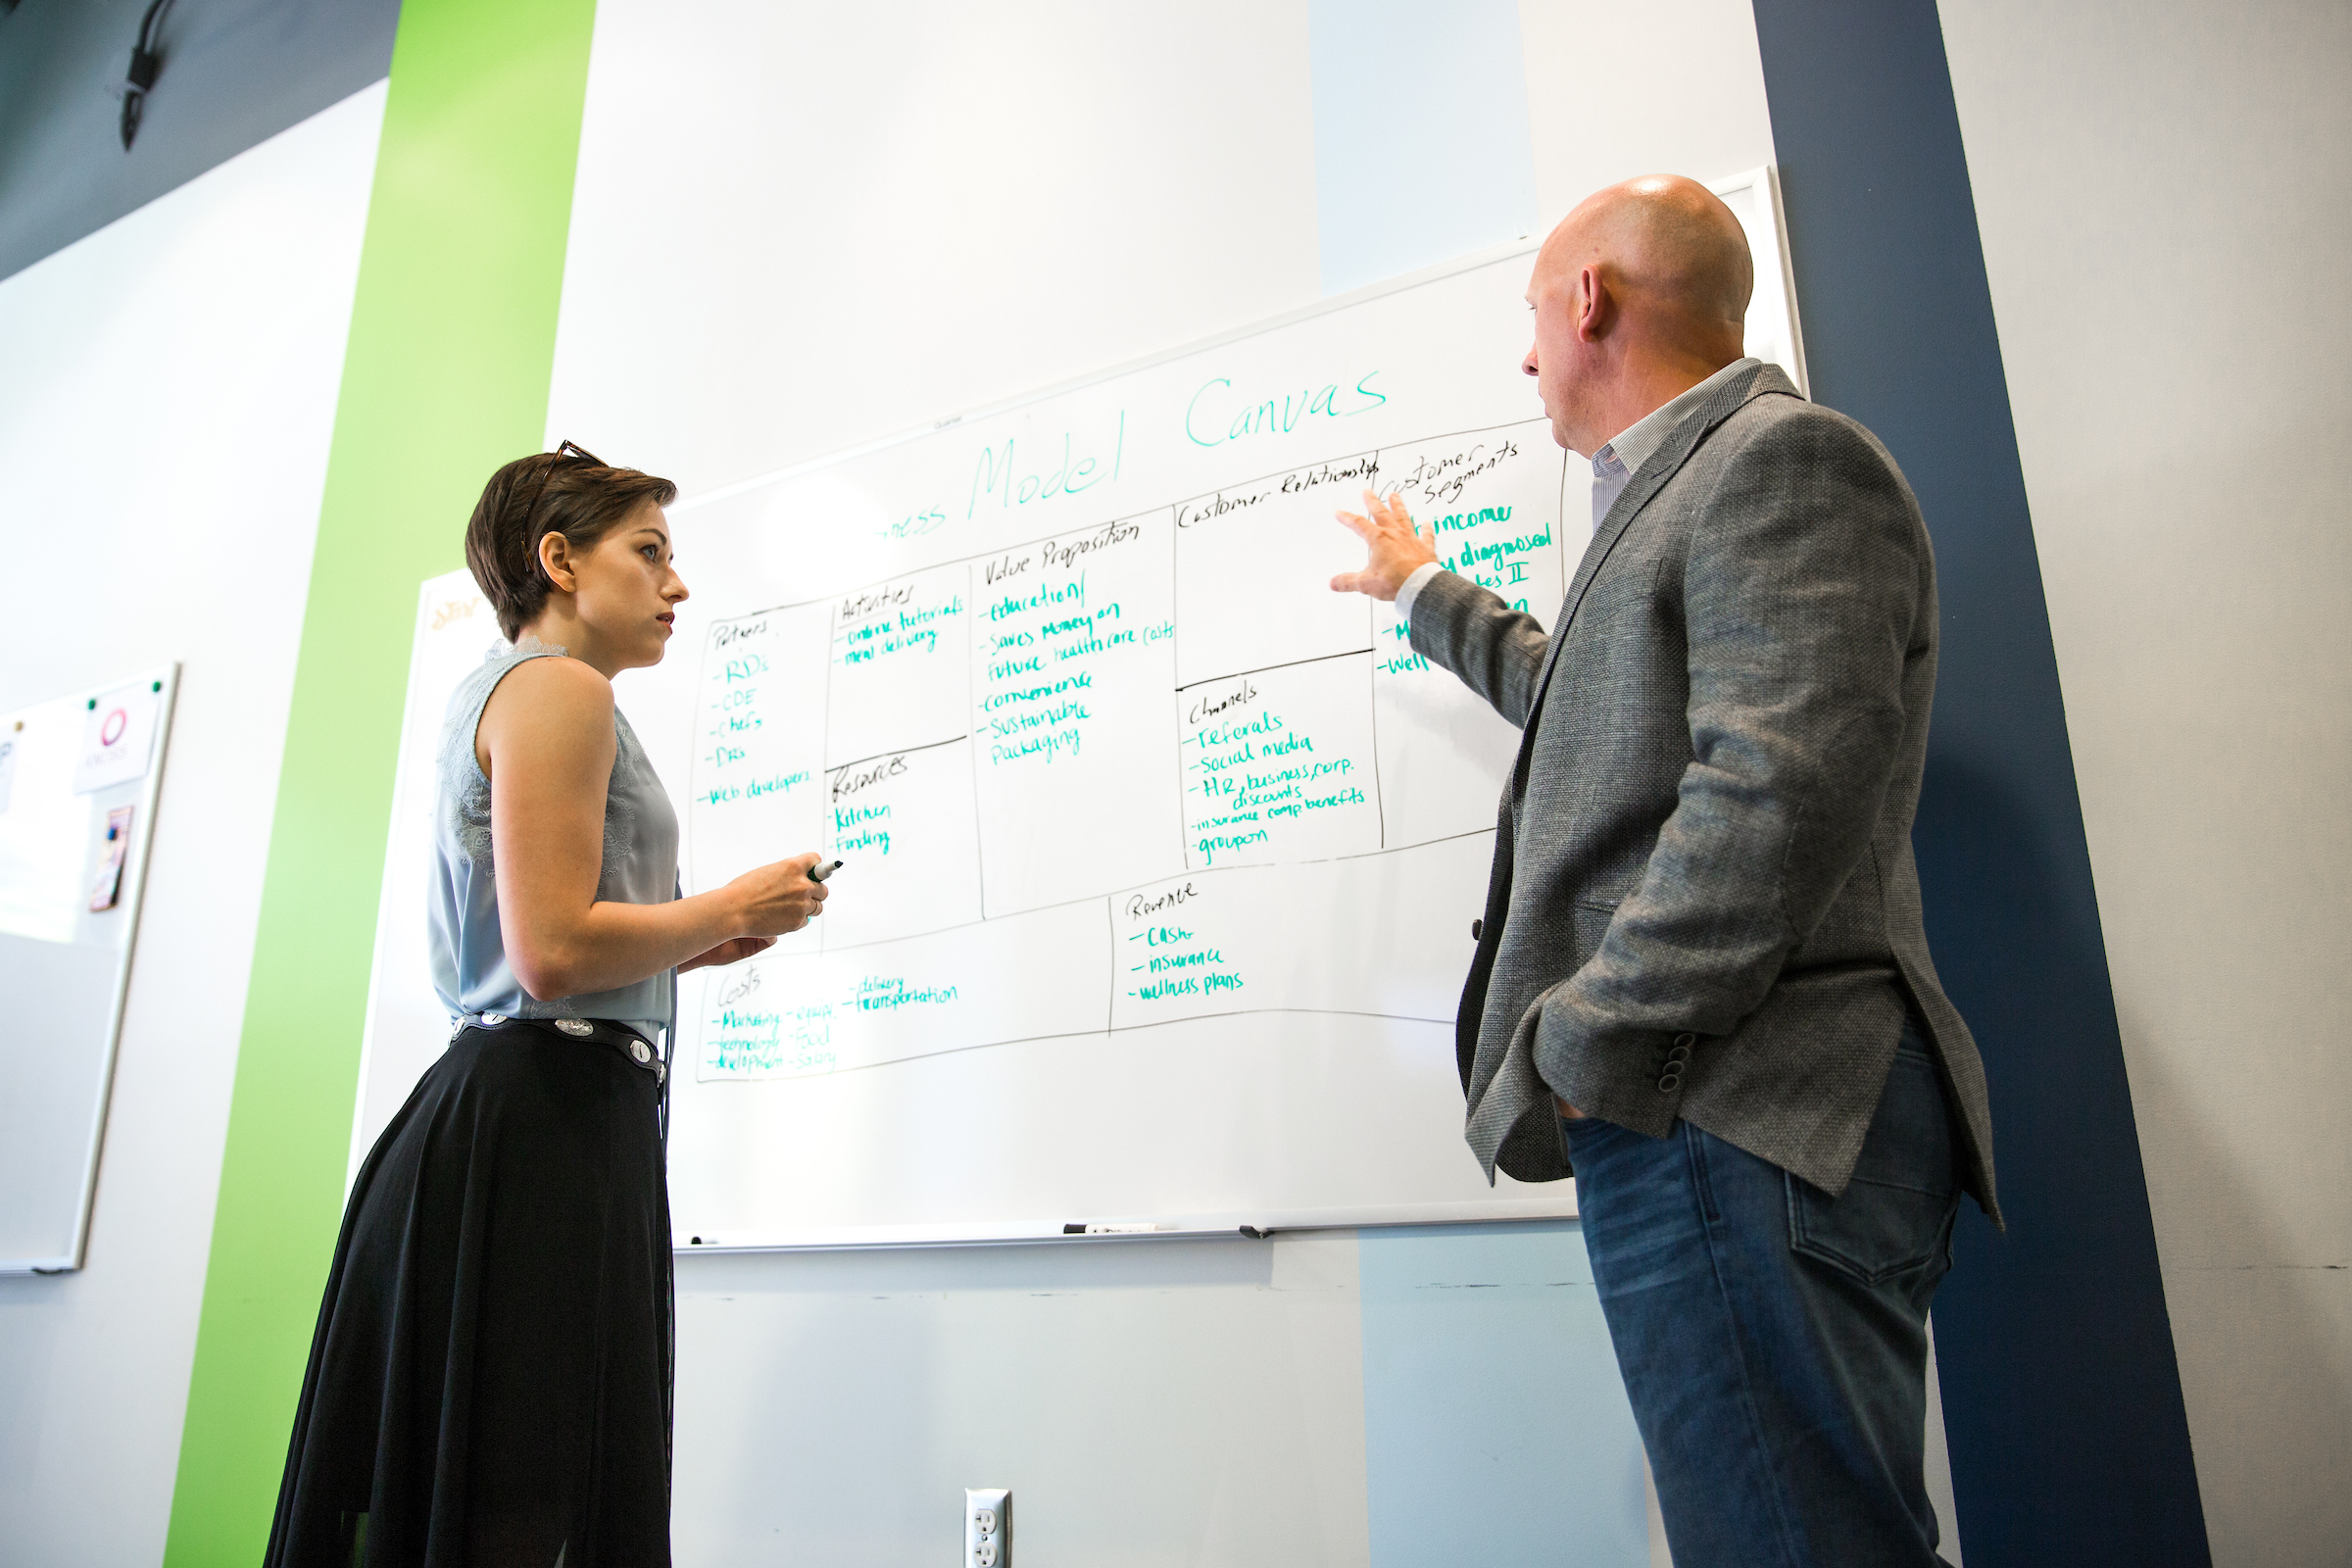 man talking and pointing to notes on a whiteboard while a woman listens